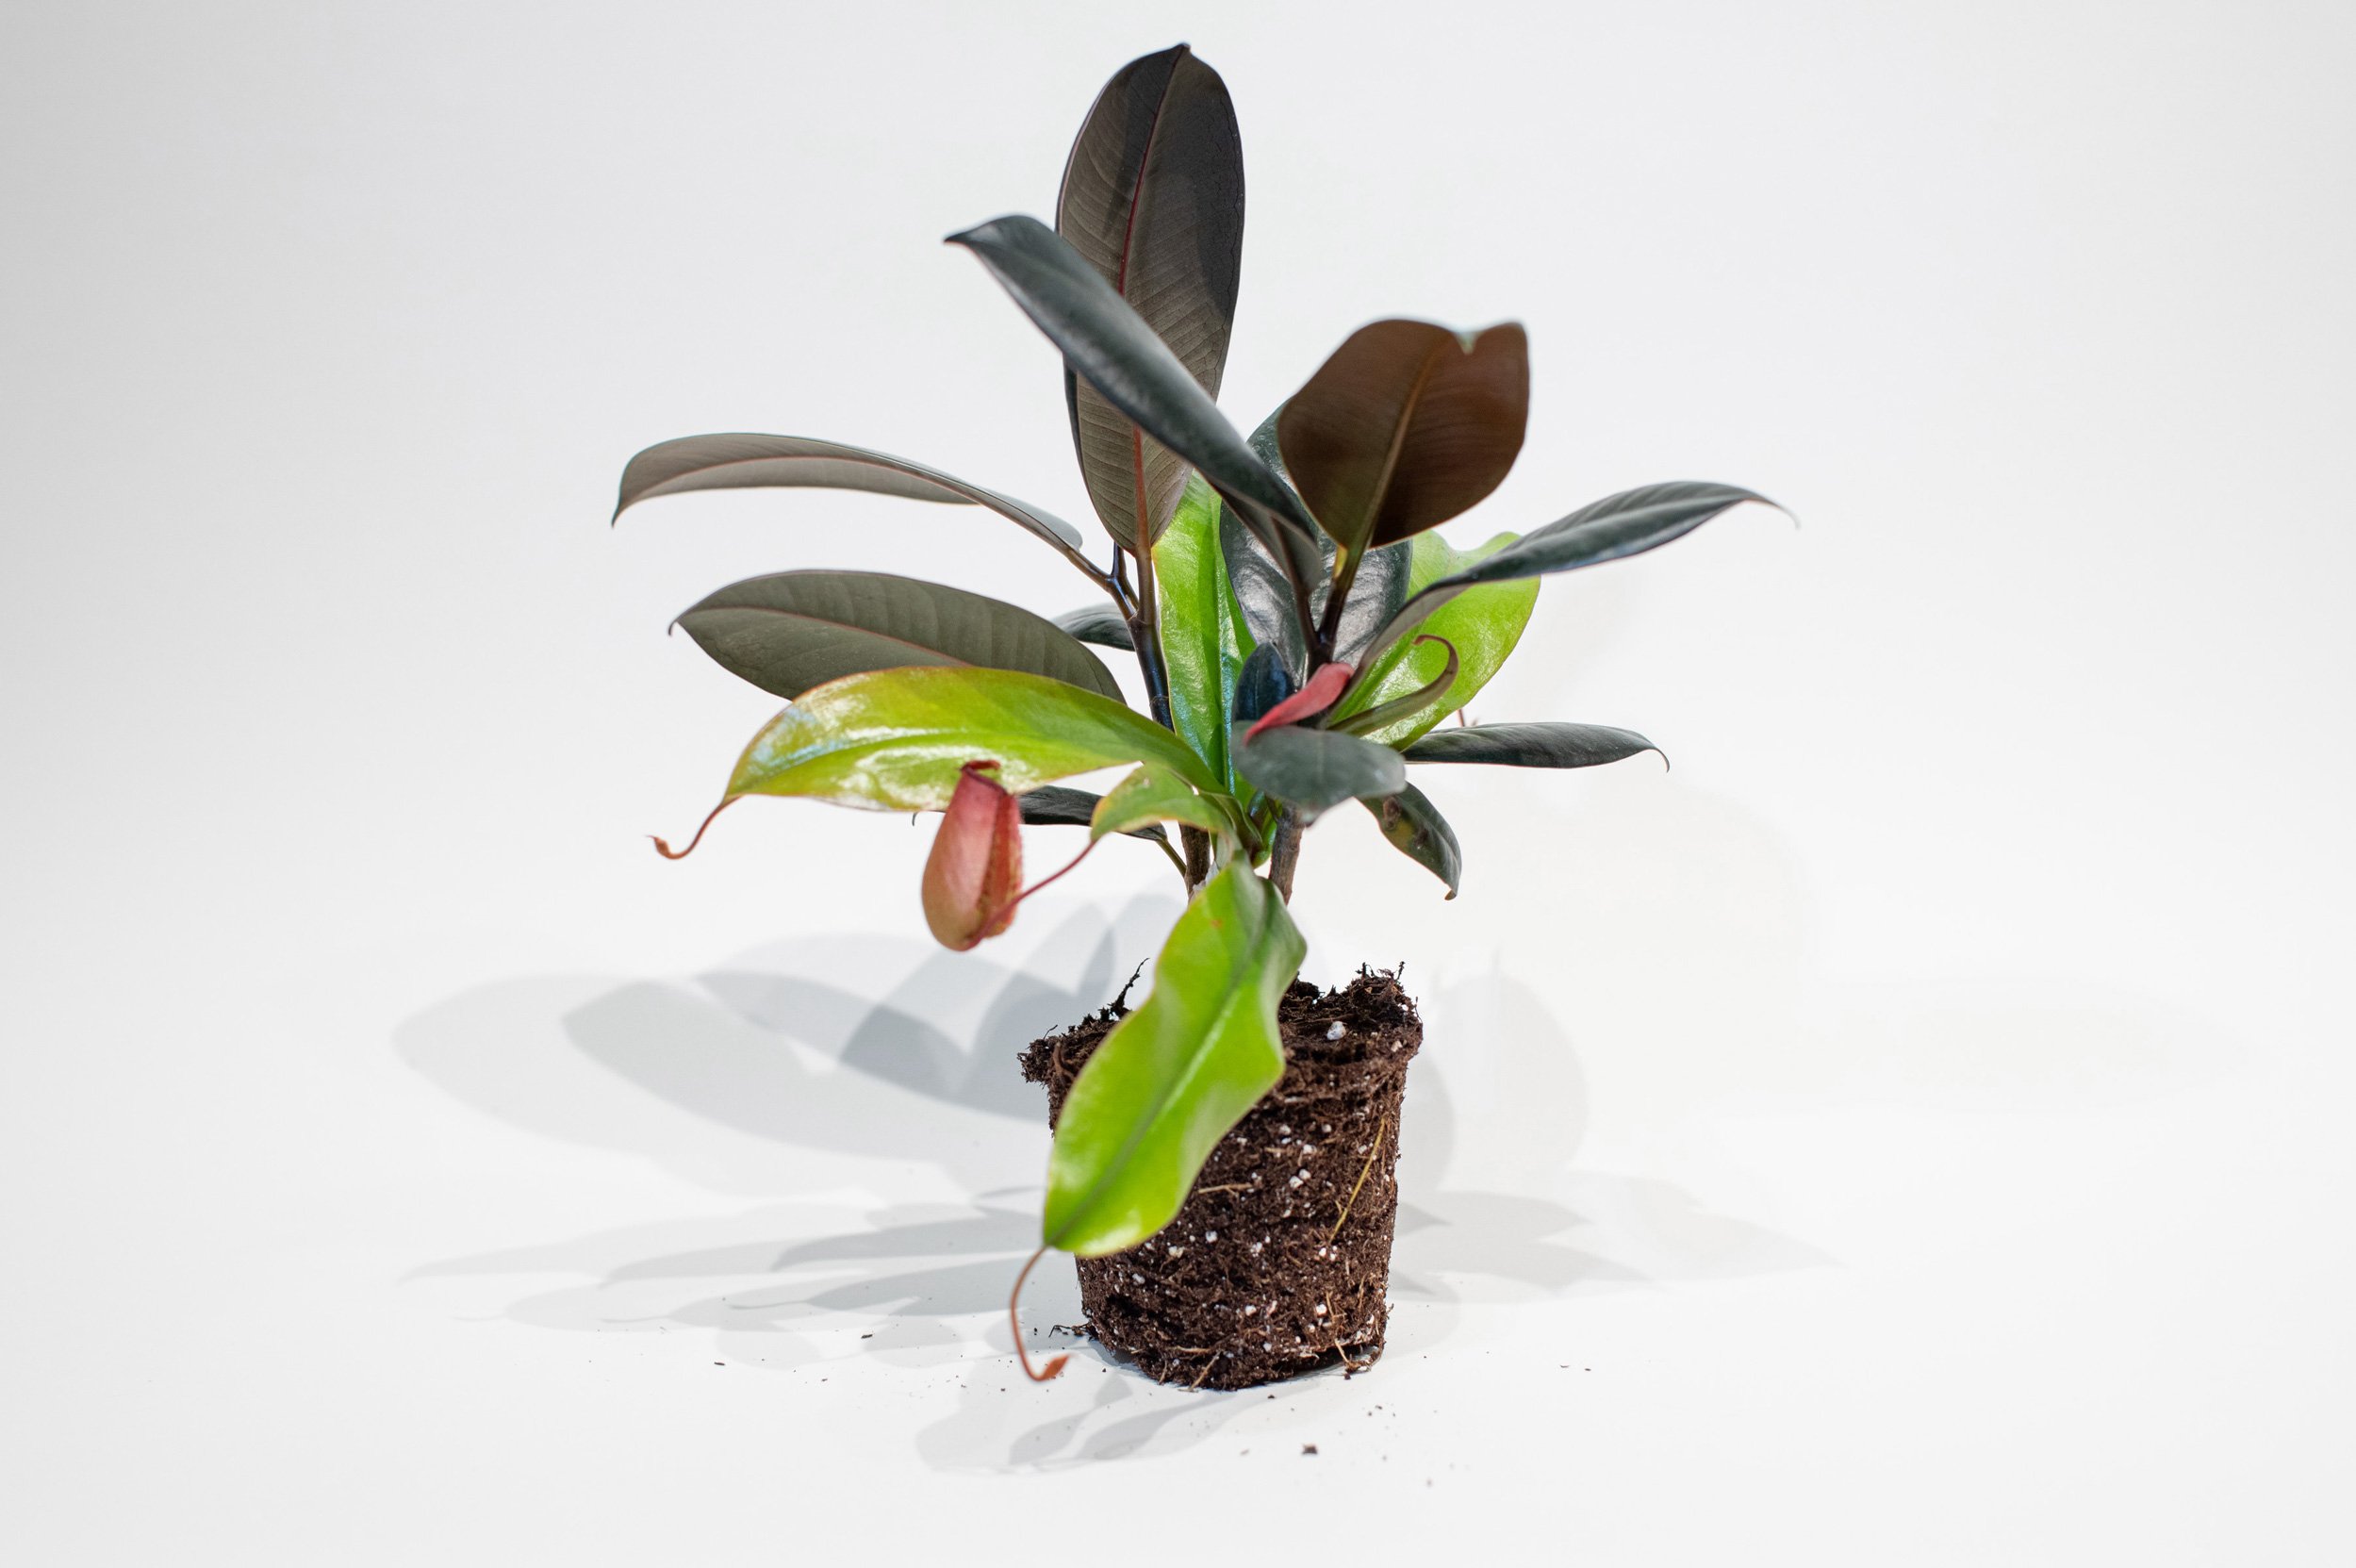   A Swallowing  (2019) Nepenthes alata Scion and Ficus elastica Rootstock, Non-Viable 13” x 11” 